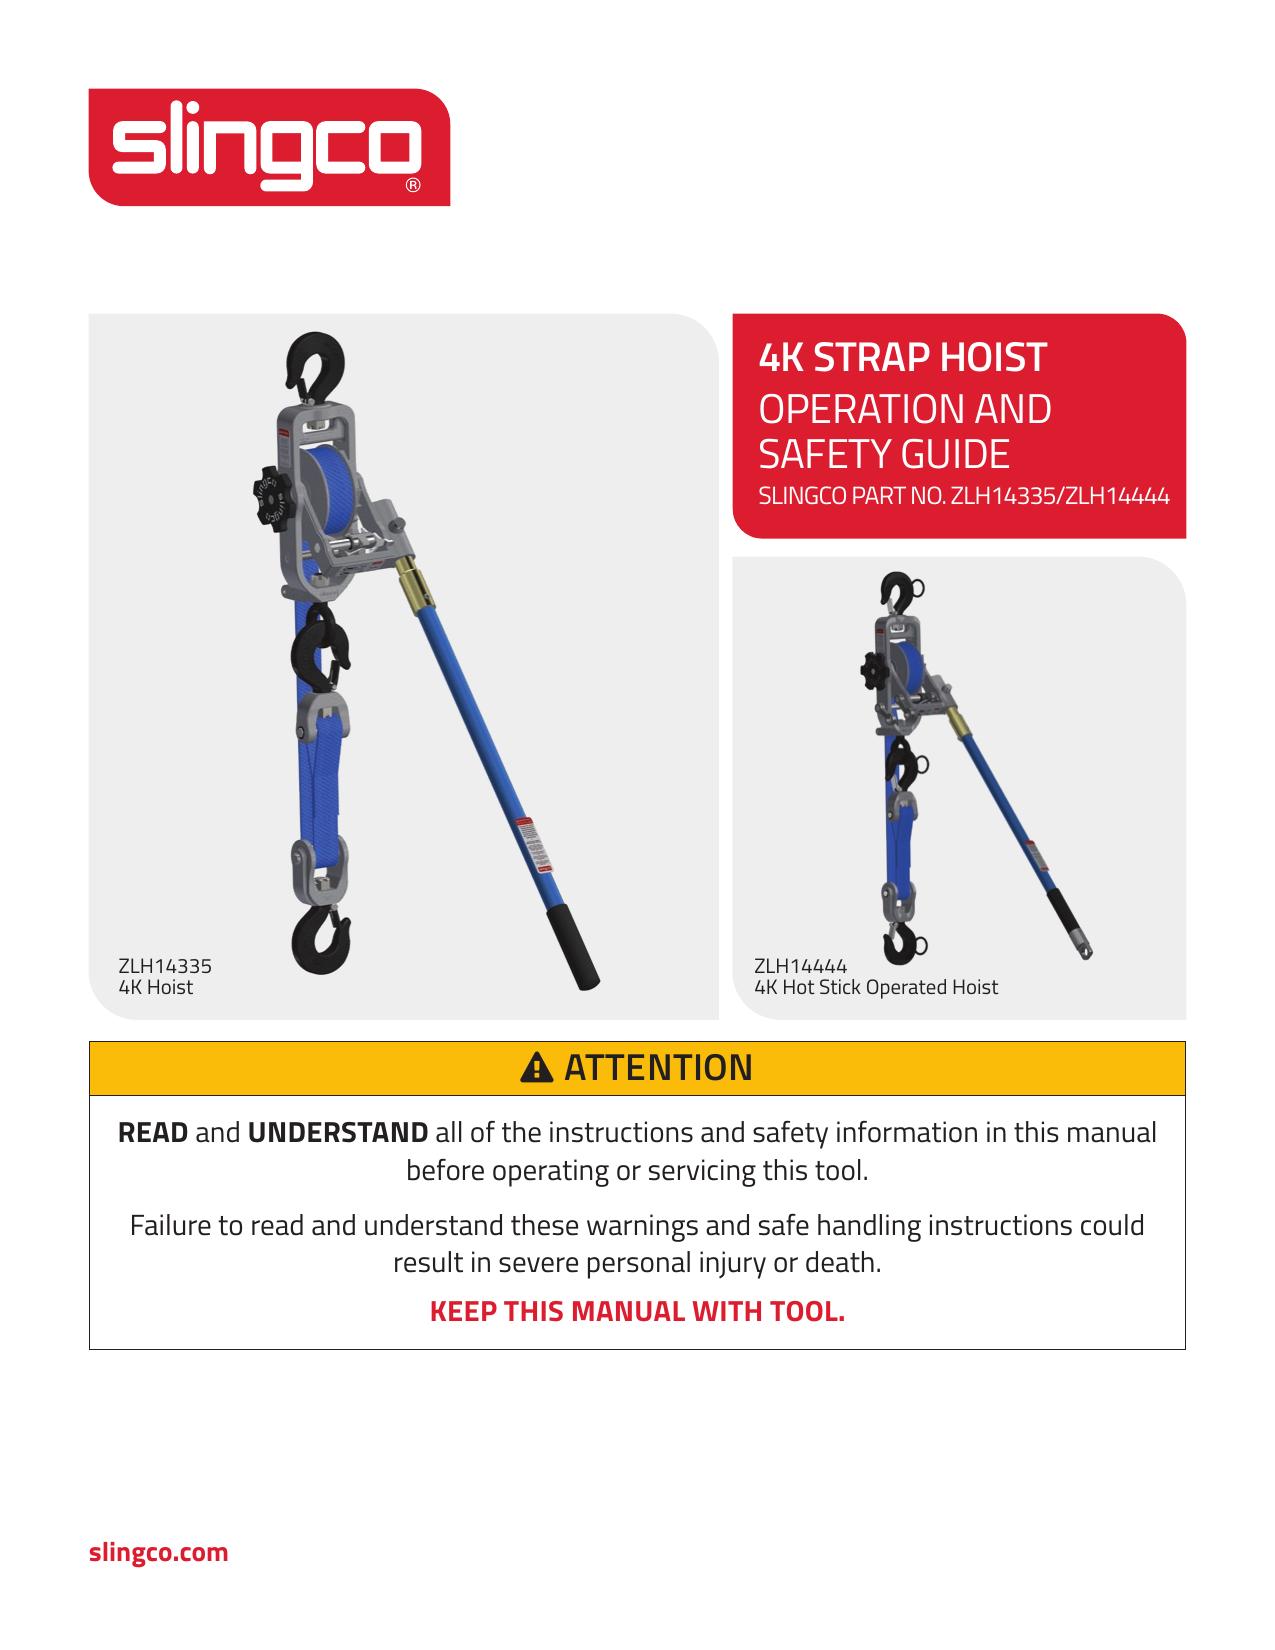 4k Strap Hoist Operation and Safety Guide